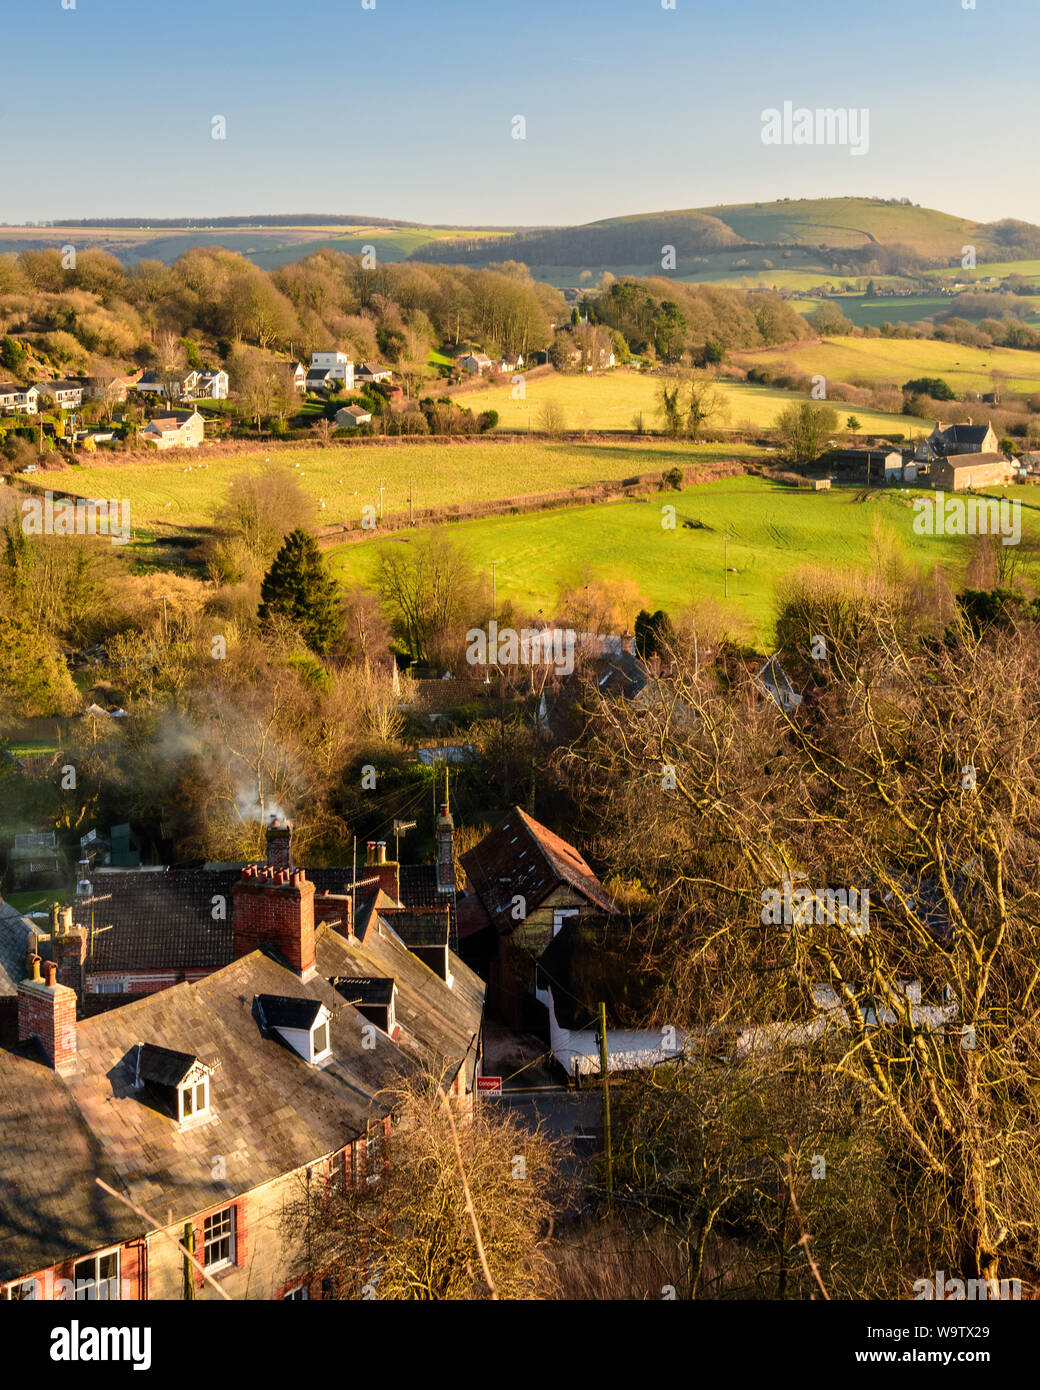 Shaftesbury, England, UK - February 18, 2017: Sun shines on the rooftops of St James's in Shaftesbury, with the rolling hills of Cranborne Chase behin Stock Photo